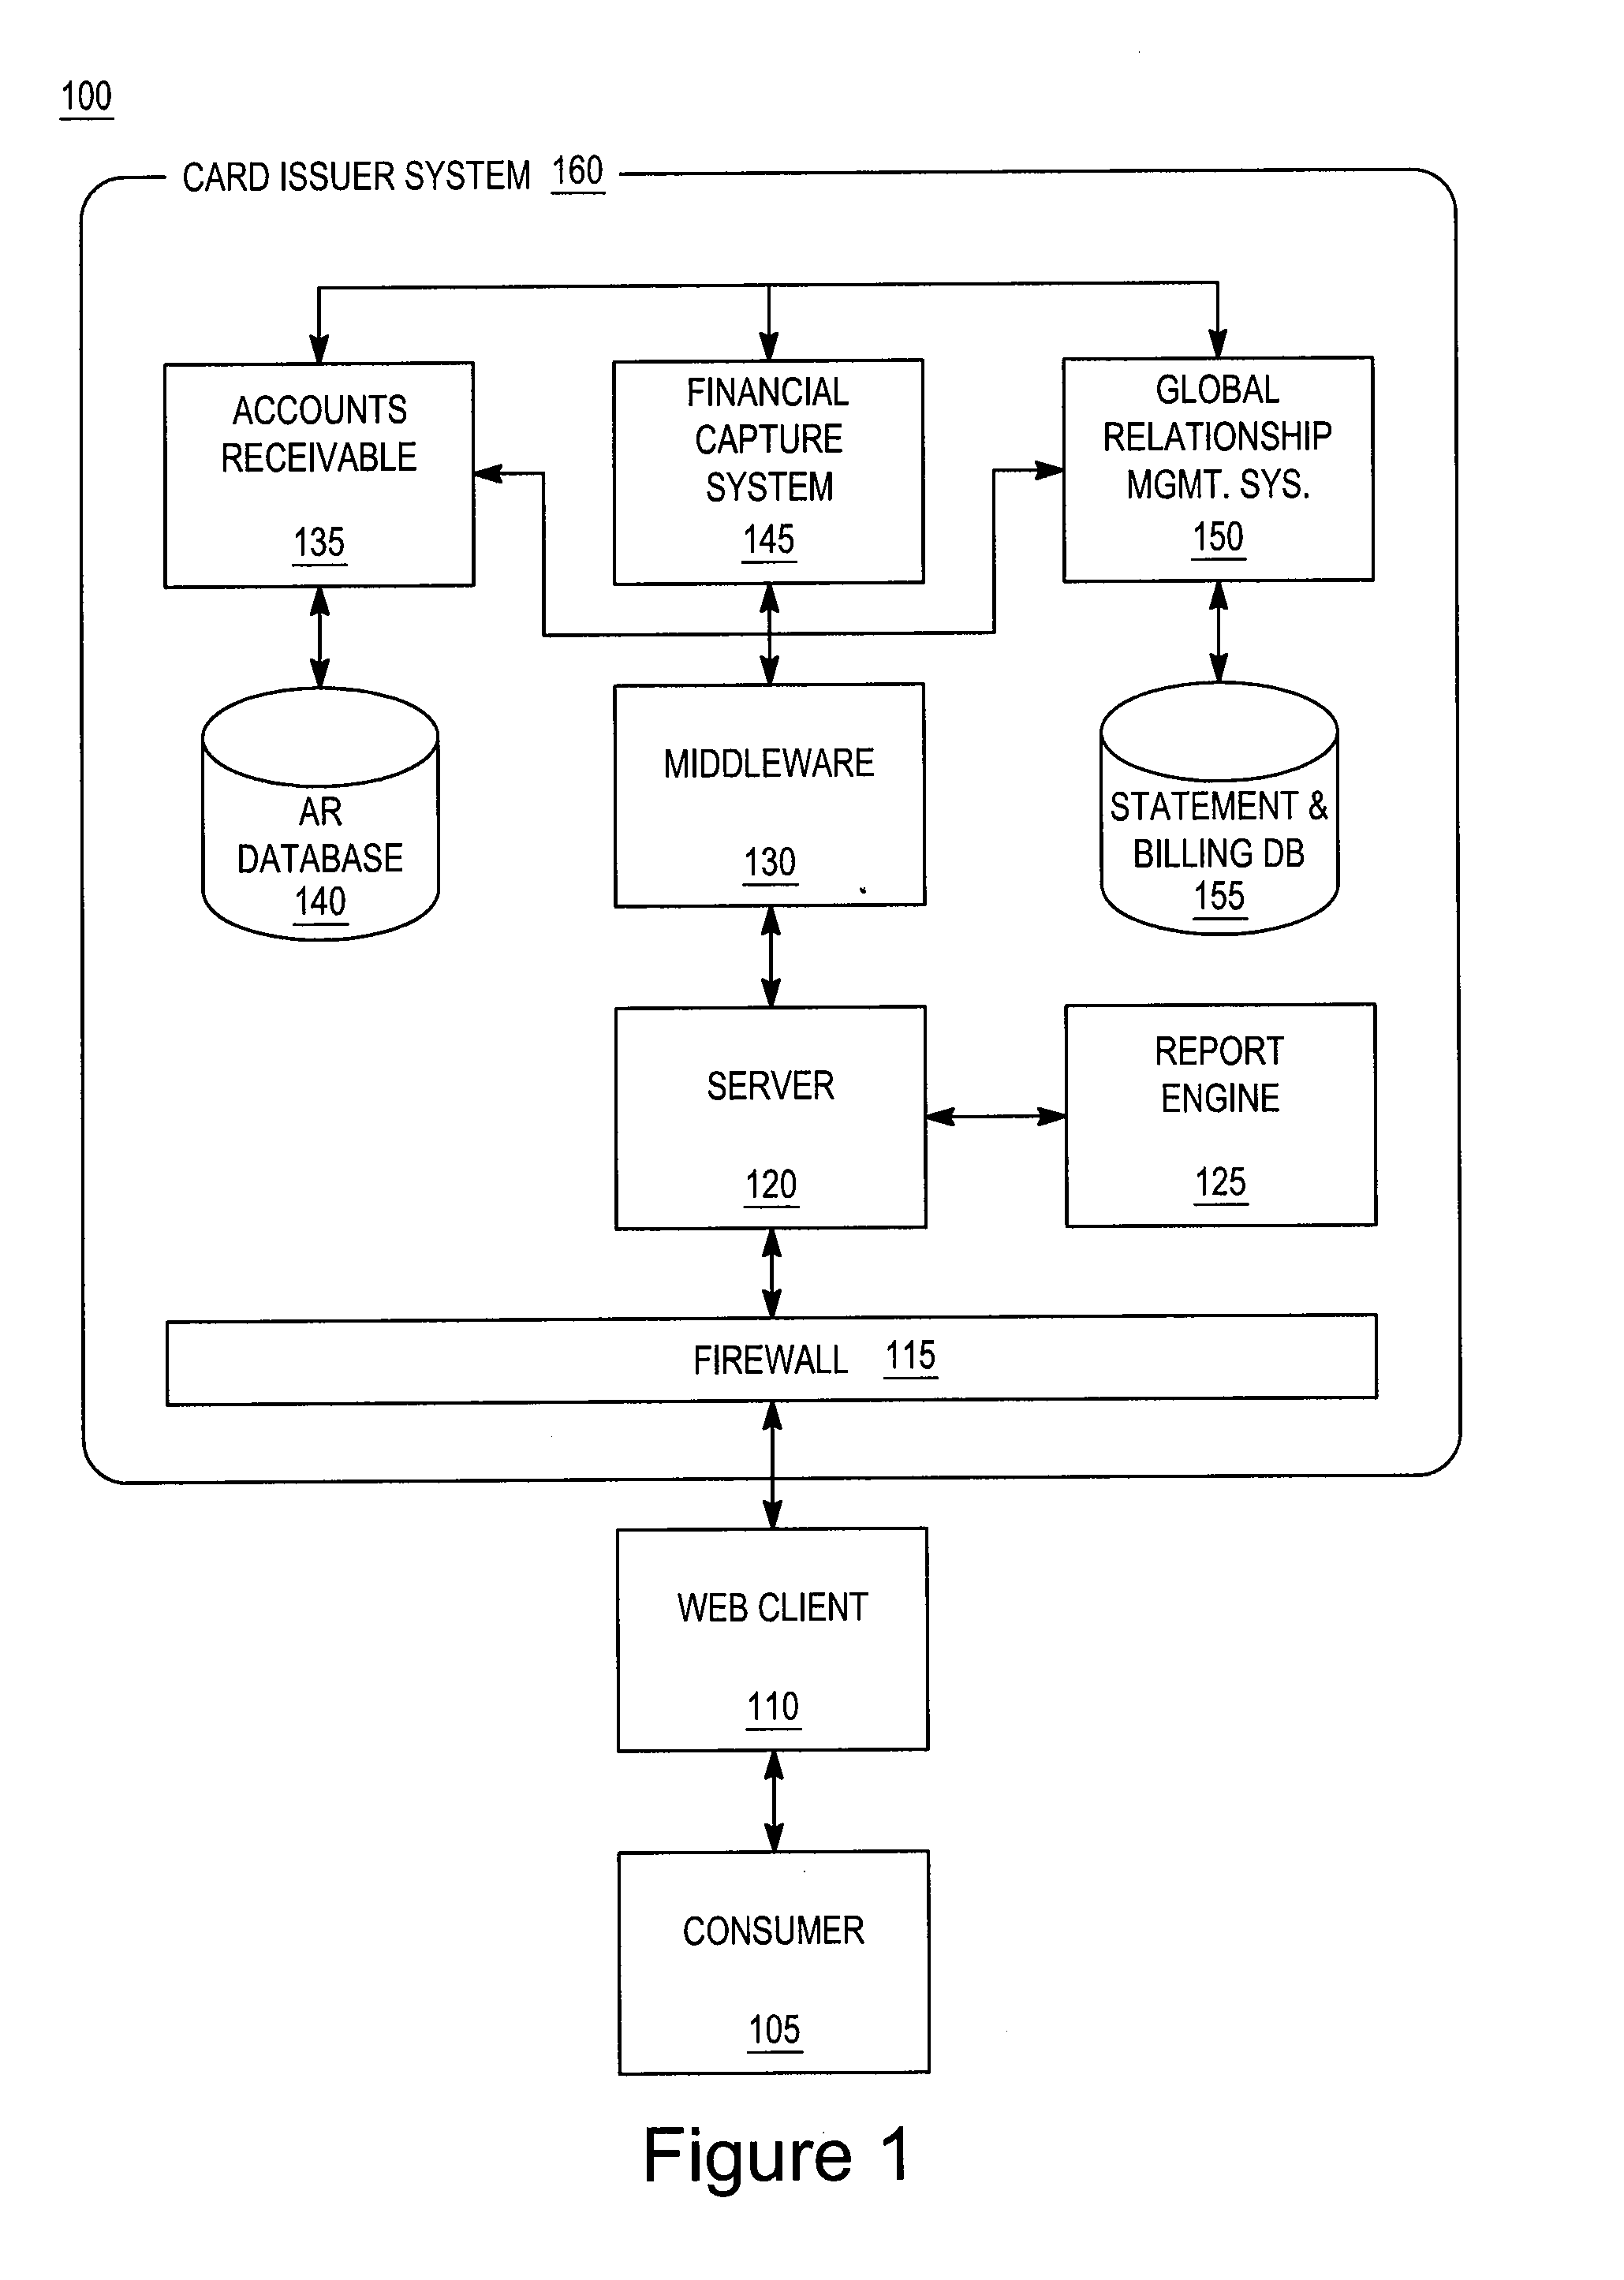 System and method for evaluating positive behavior and offering incentives based upon limited use identifier transactions